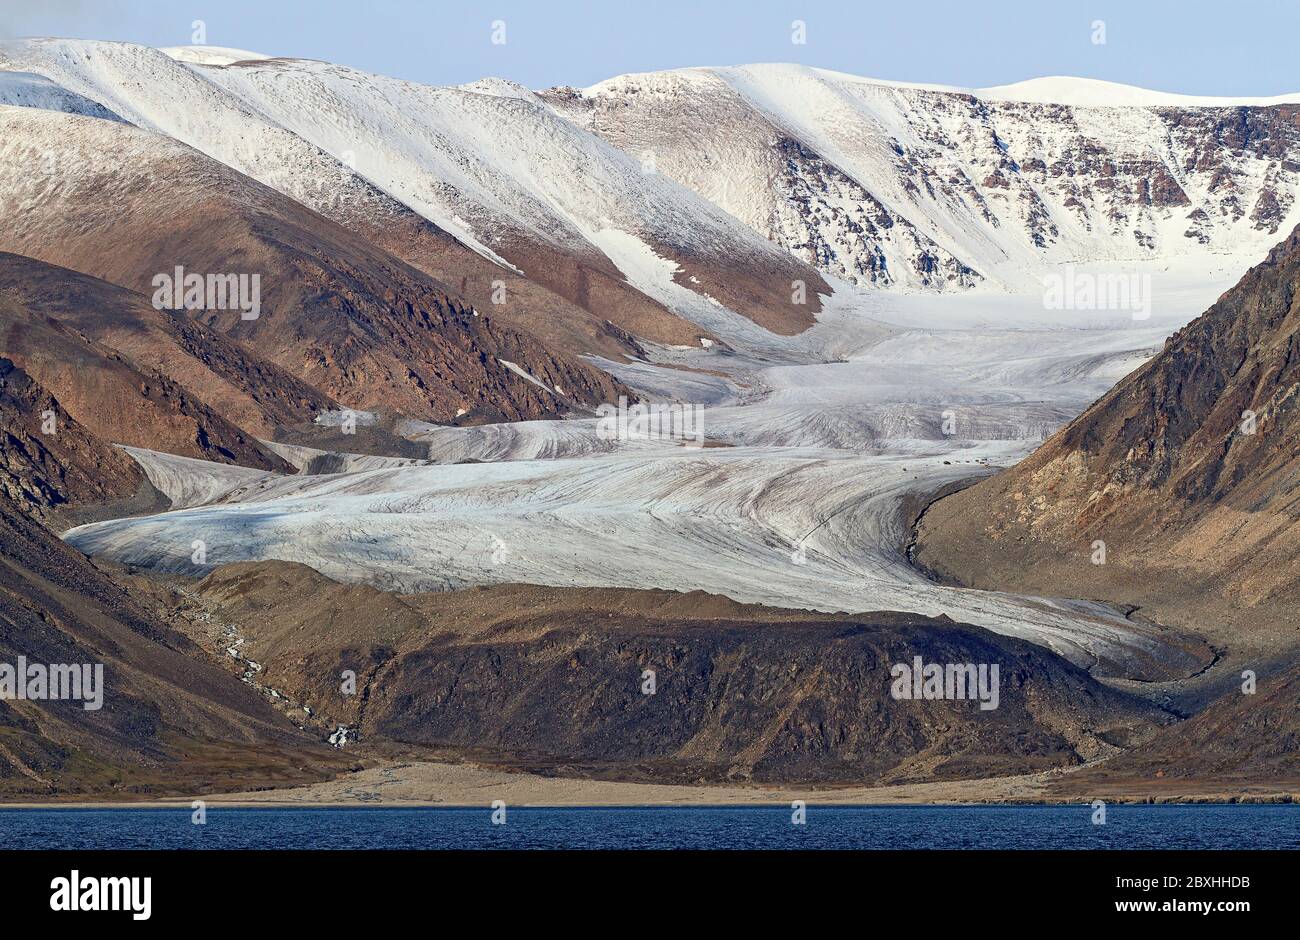 Glaciers (rivers of ice) flowing from the ice cap to the ocean off Devon Island, the largest uninhabited island on Earth. Stock Photo